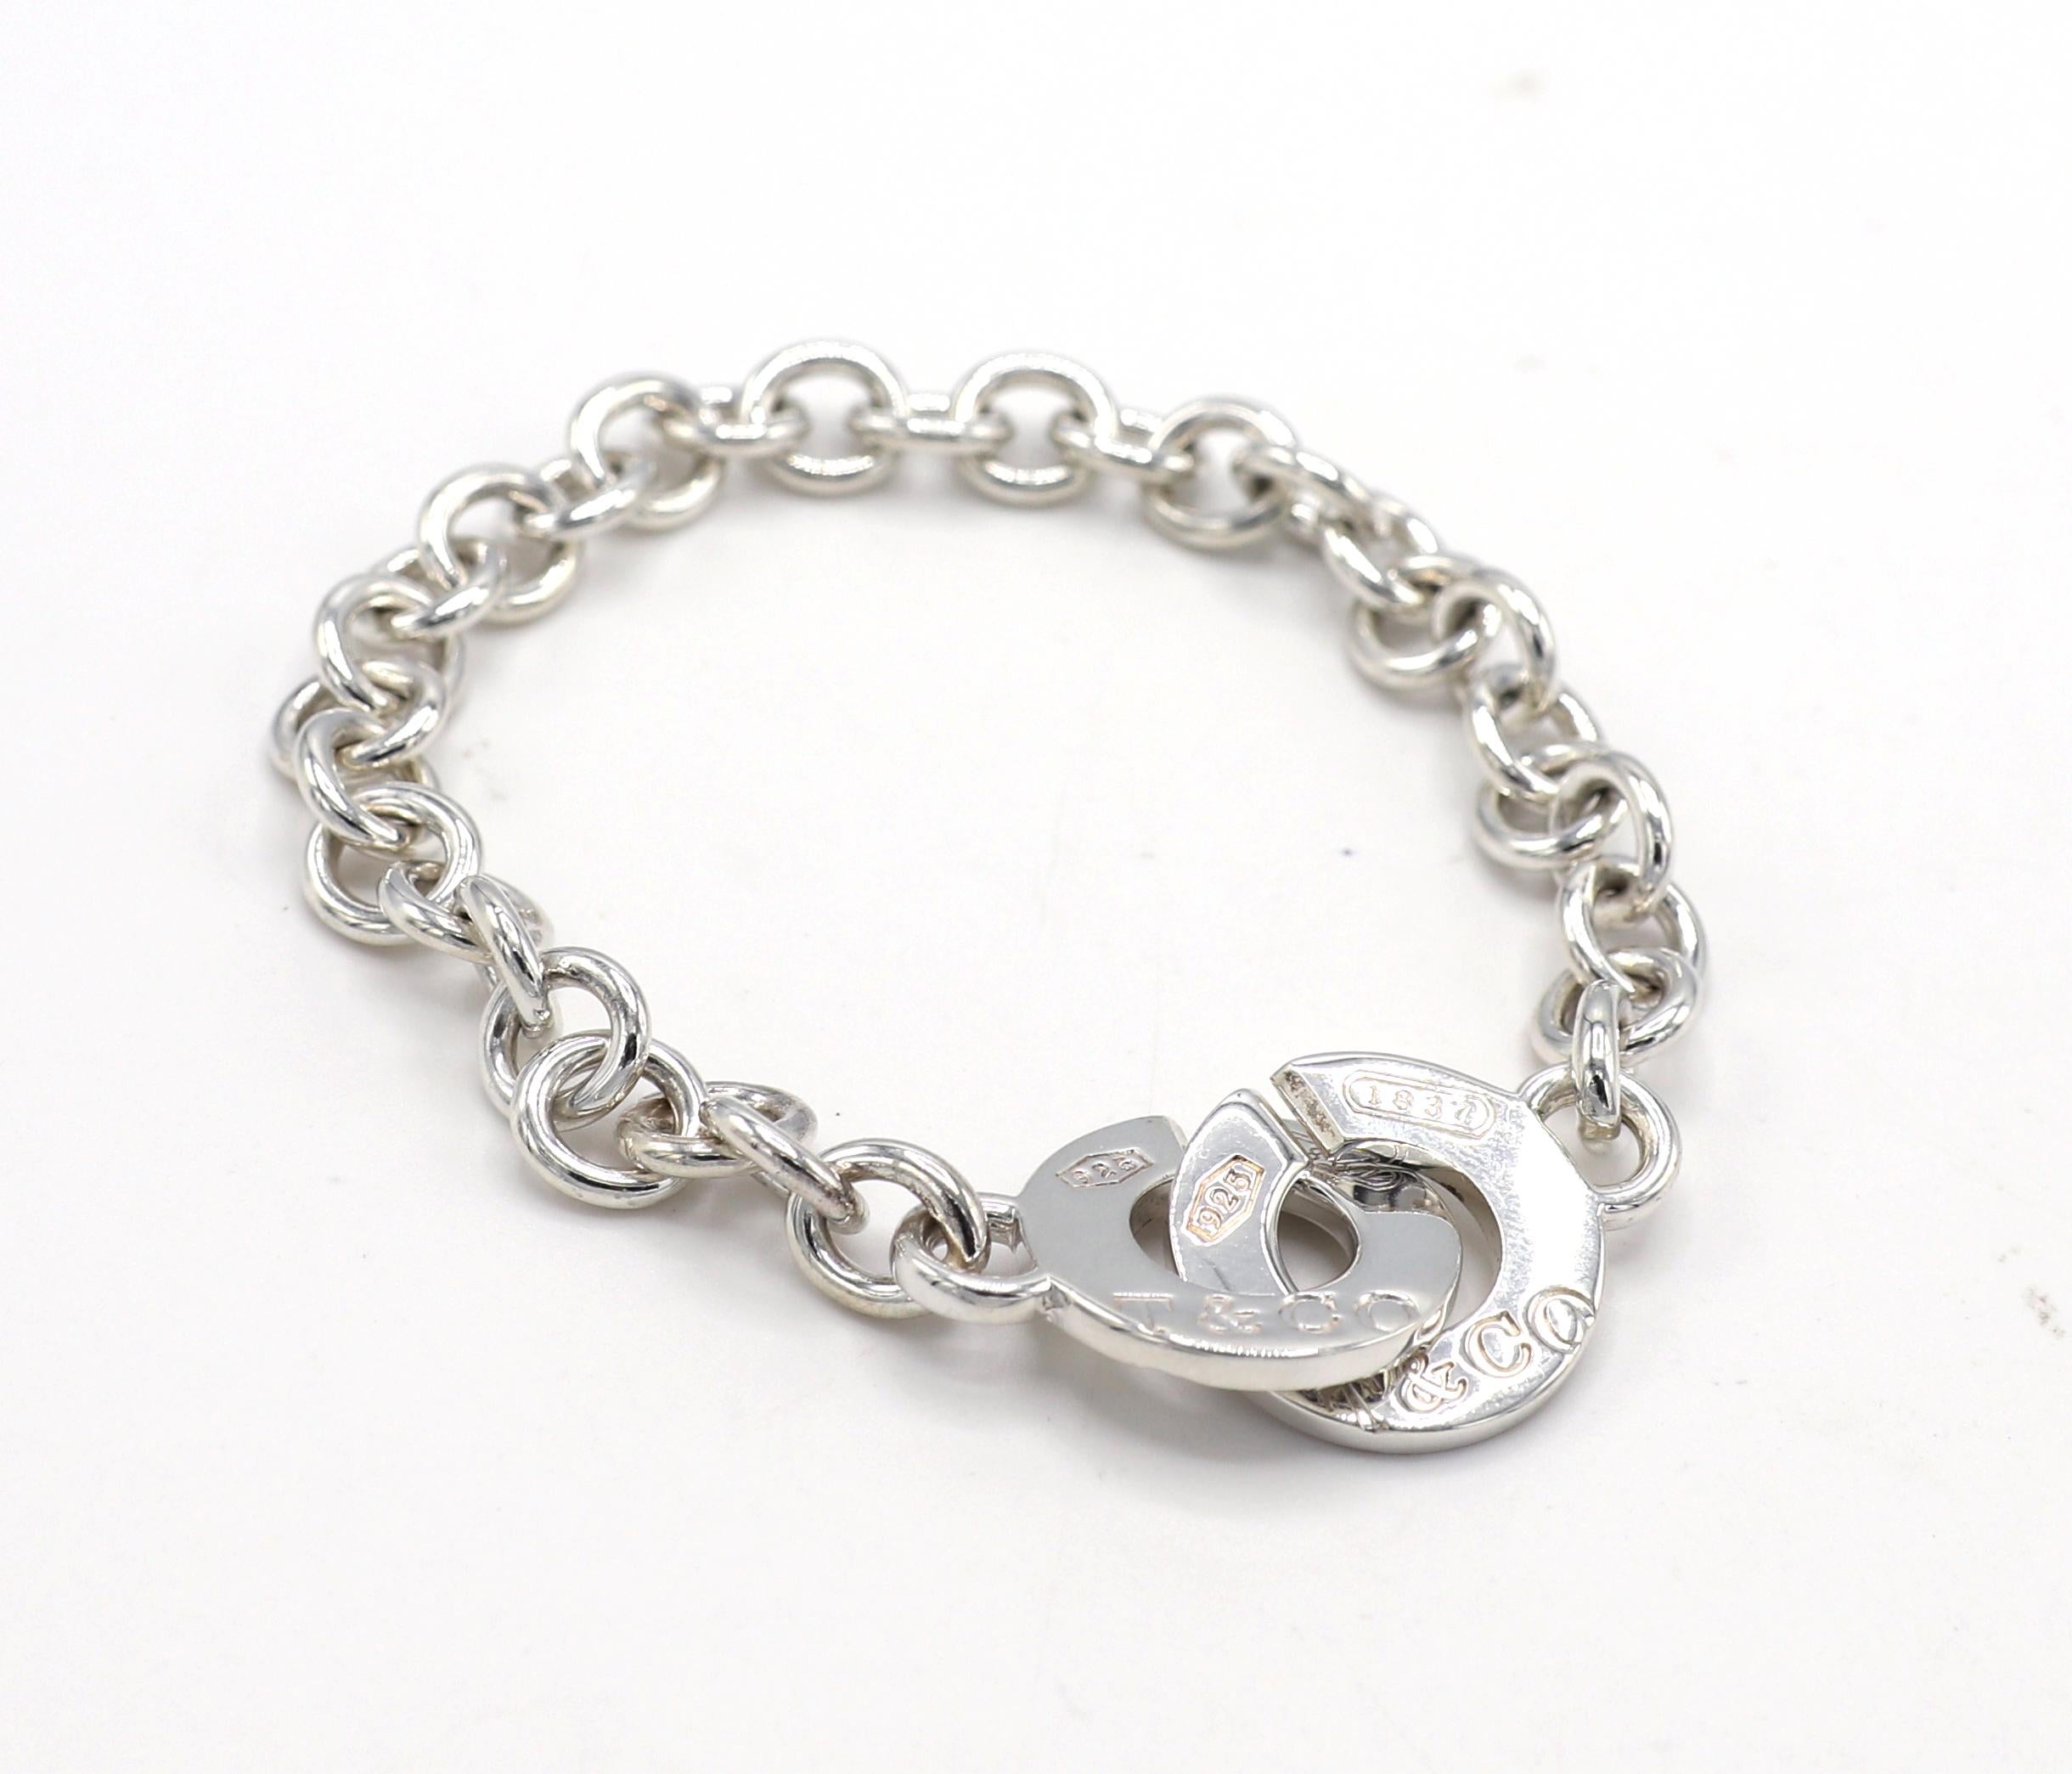 Tiffany & Co. Sterling Silver 1837 Interlocking Circle Chain Link Bracelet
Metal: Sterling silver
Weight: 22.47 grams
Length: 7.5 inches
Links: 7.5 x 8.5mm
Circle clasps: 18mm diameter